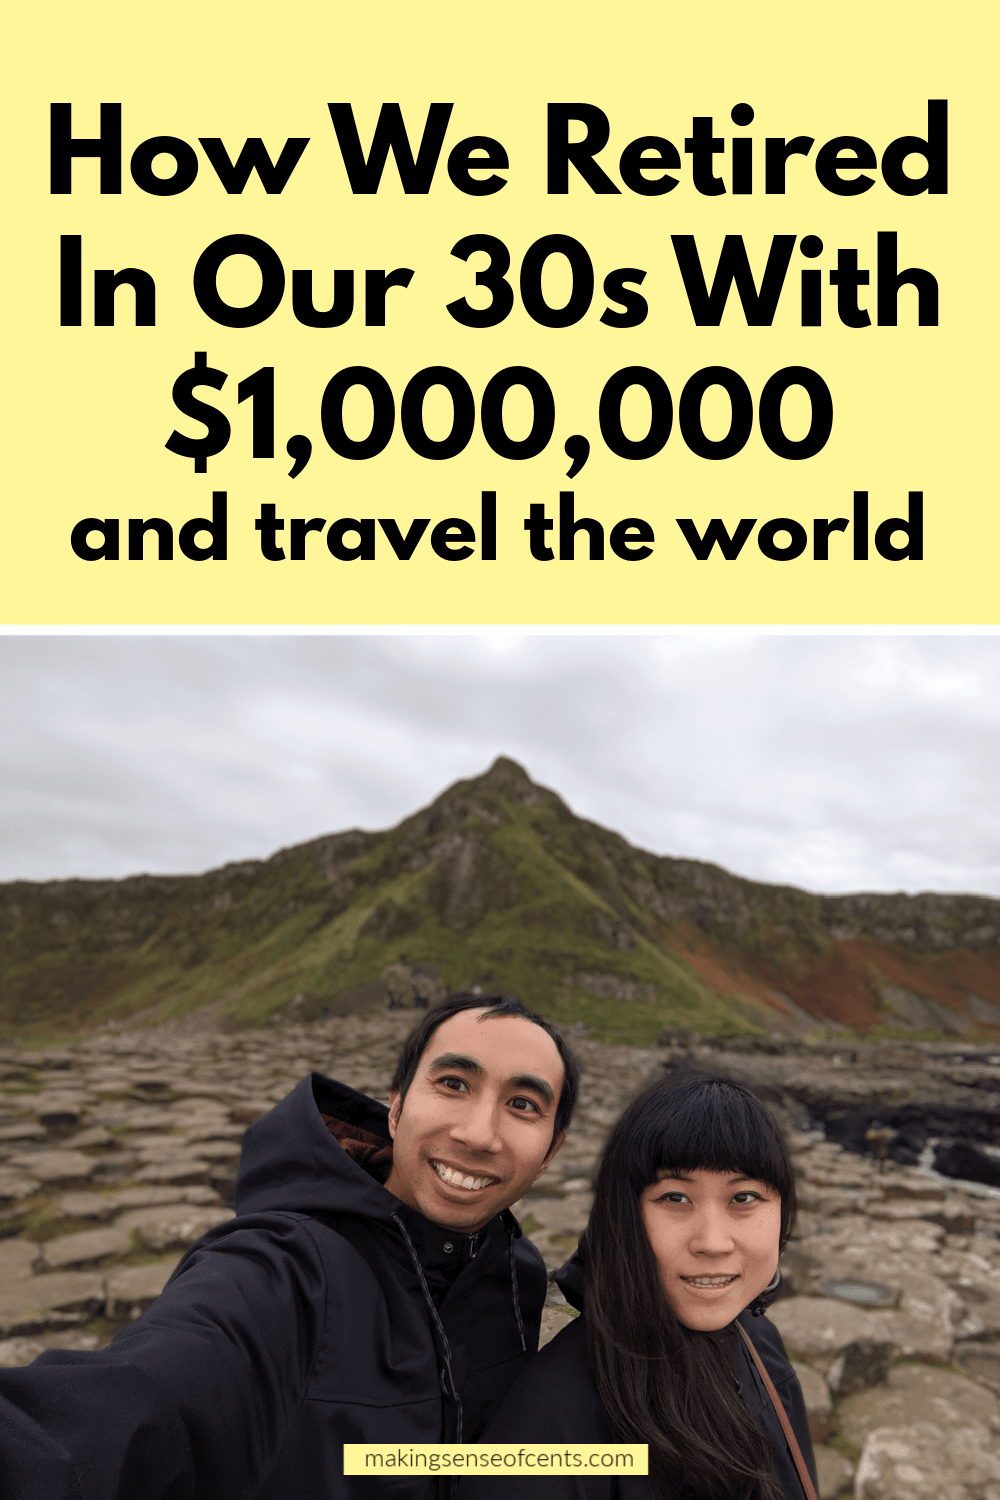 How We Retired In Our 30s With $1,000,000 And Travel The World